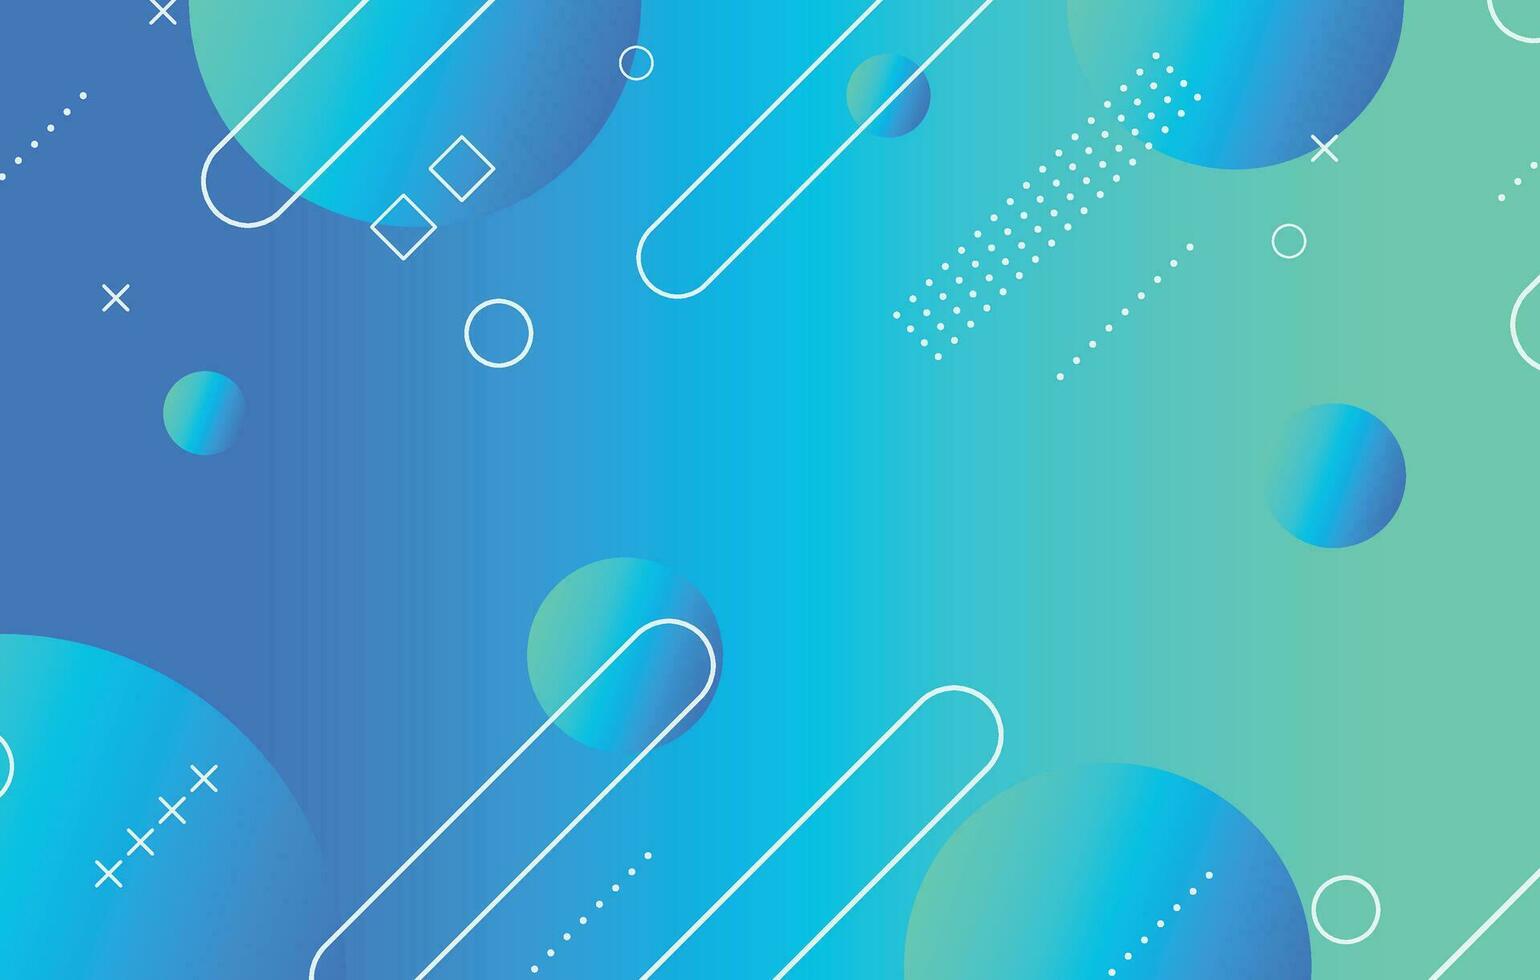 Abstract colorful geometric background. Blue elements with gradient vector